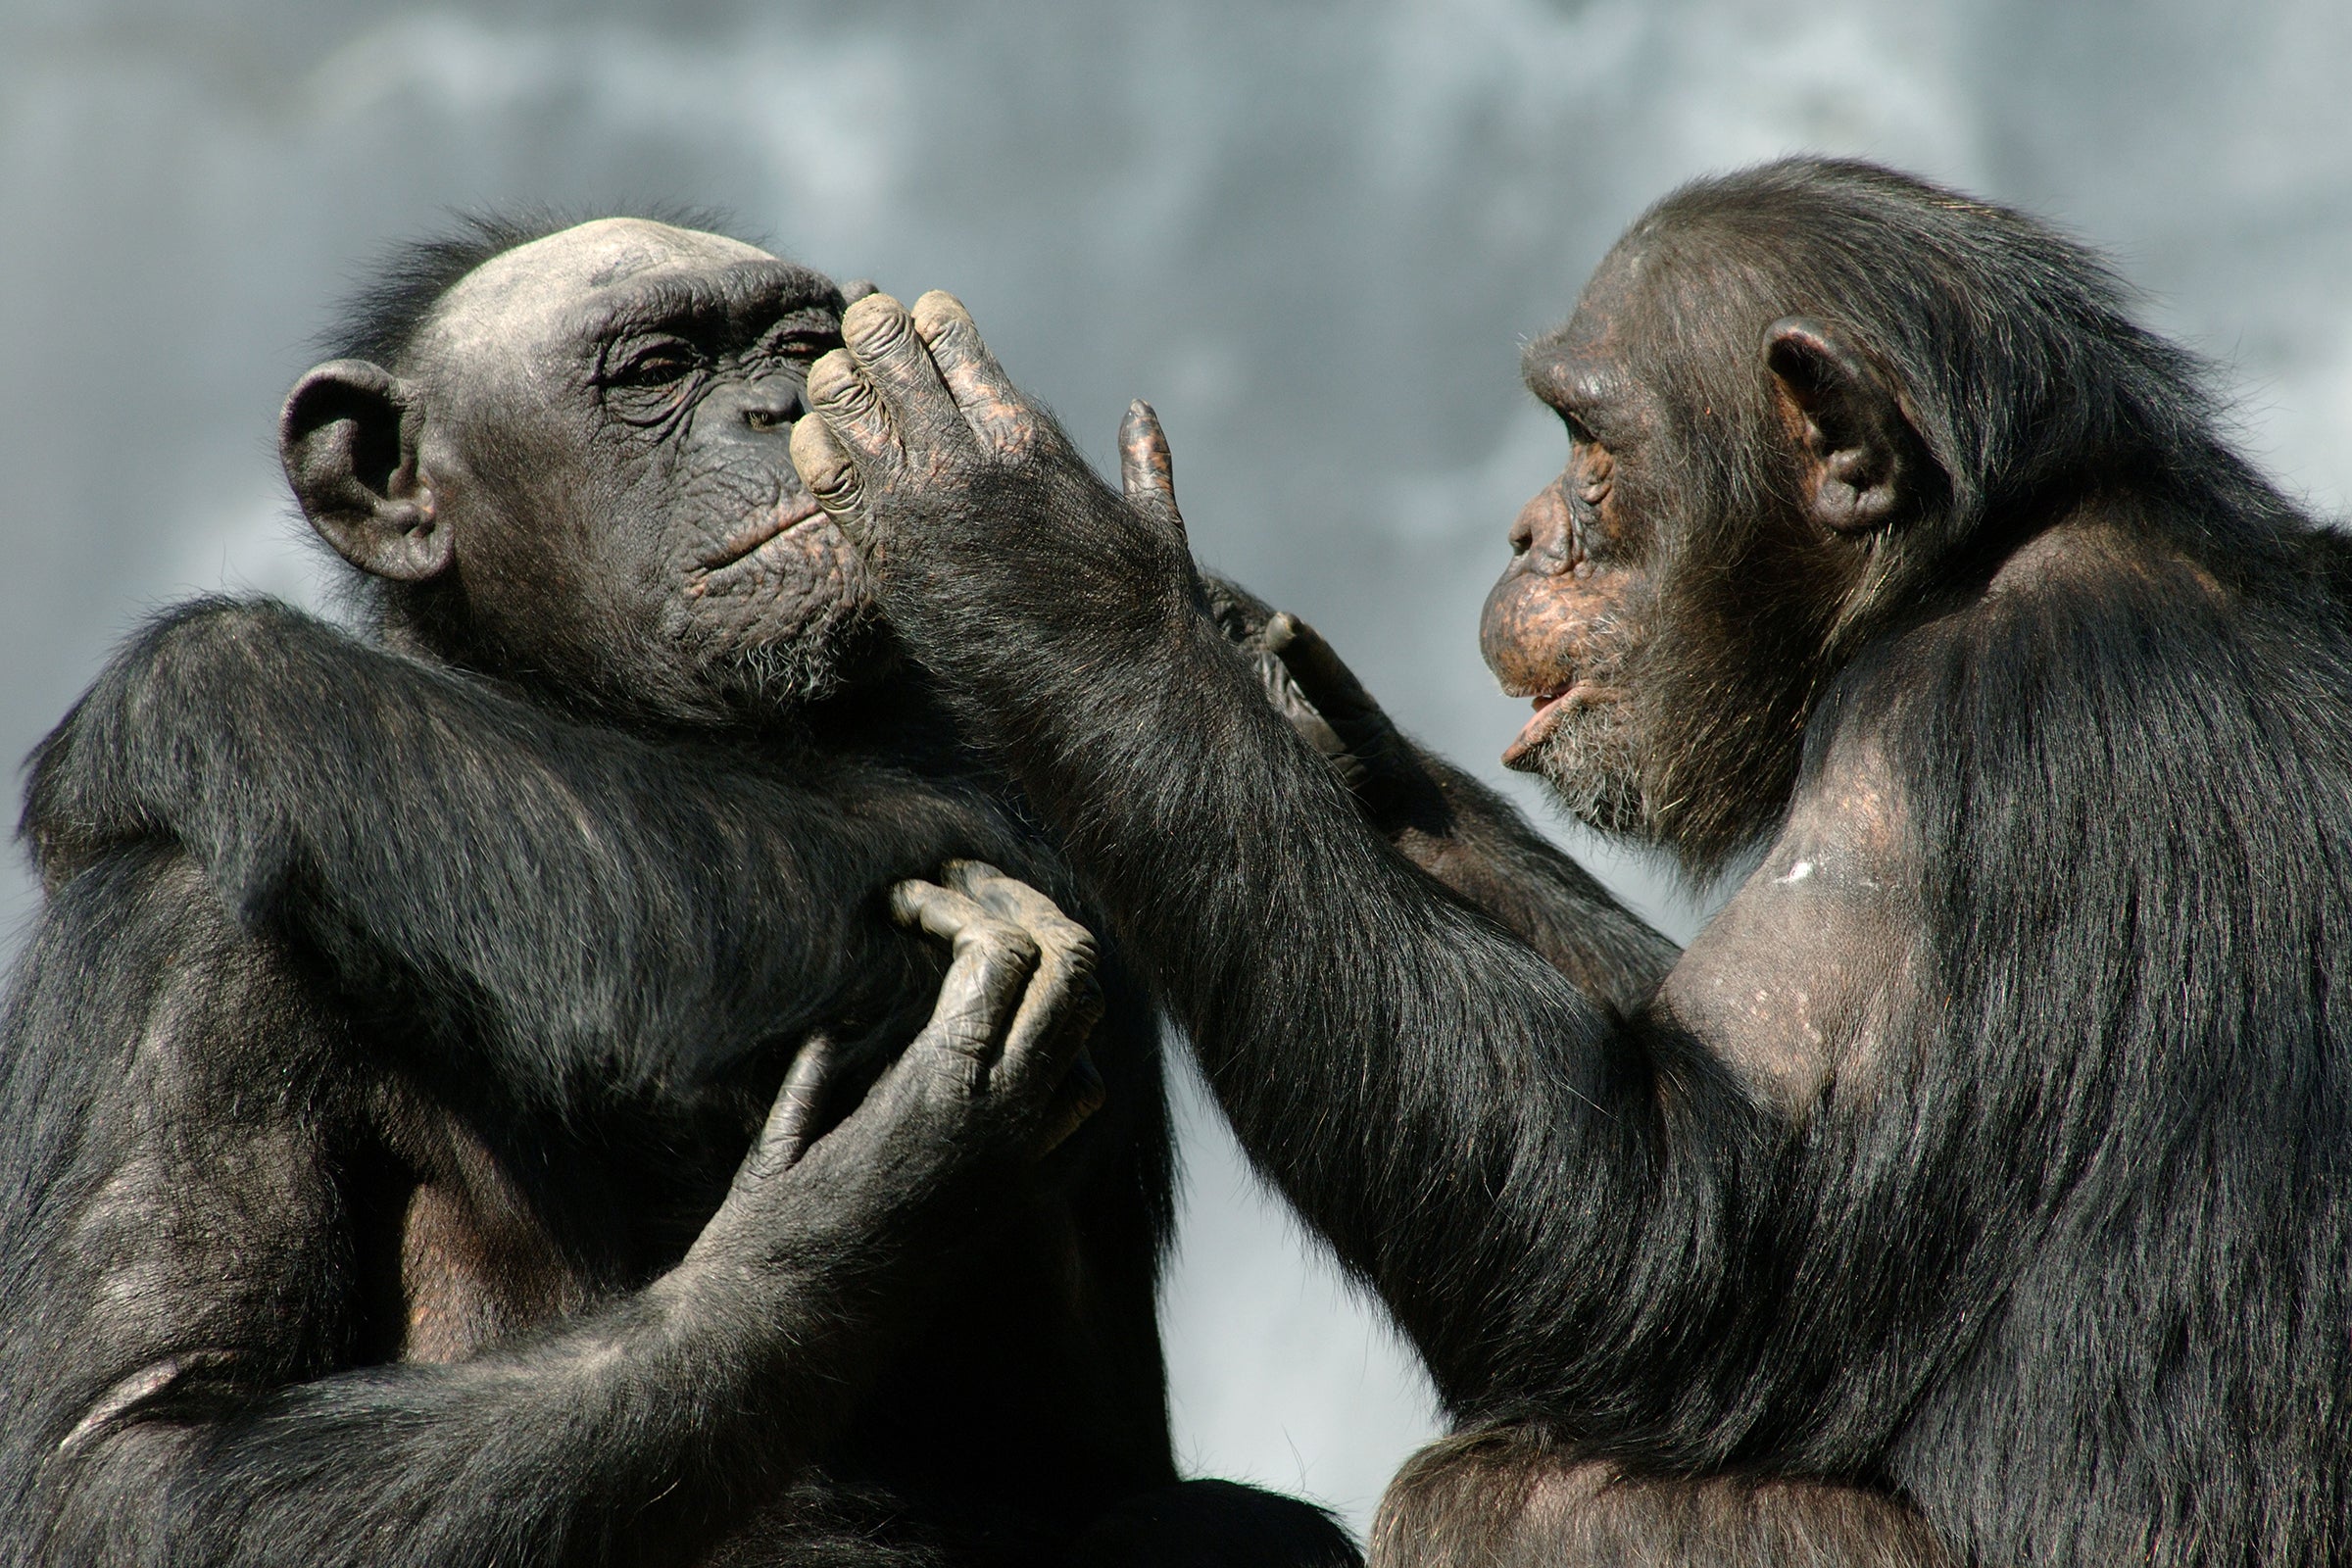 Chimpanzee Sex - Humans Can Correctly Guess the Meaning of Chimp Gestures - Scientific  American